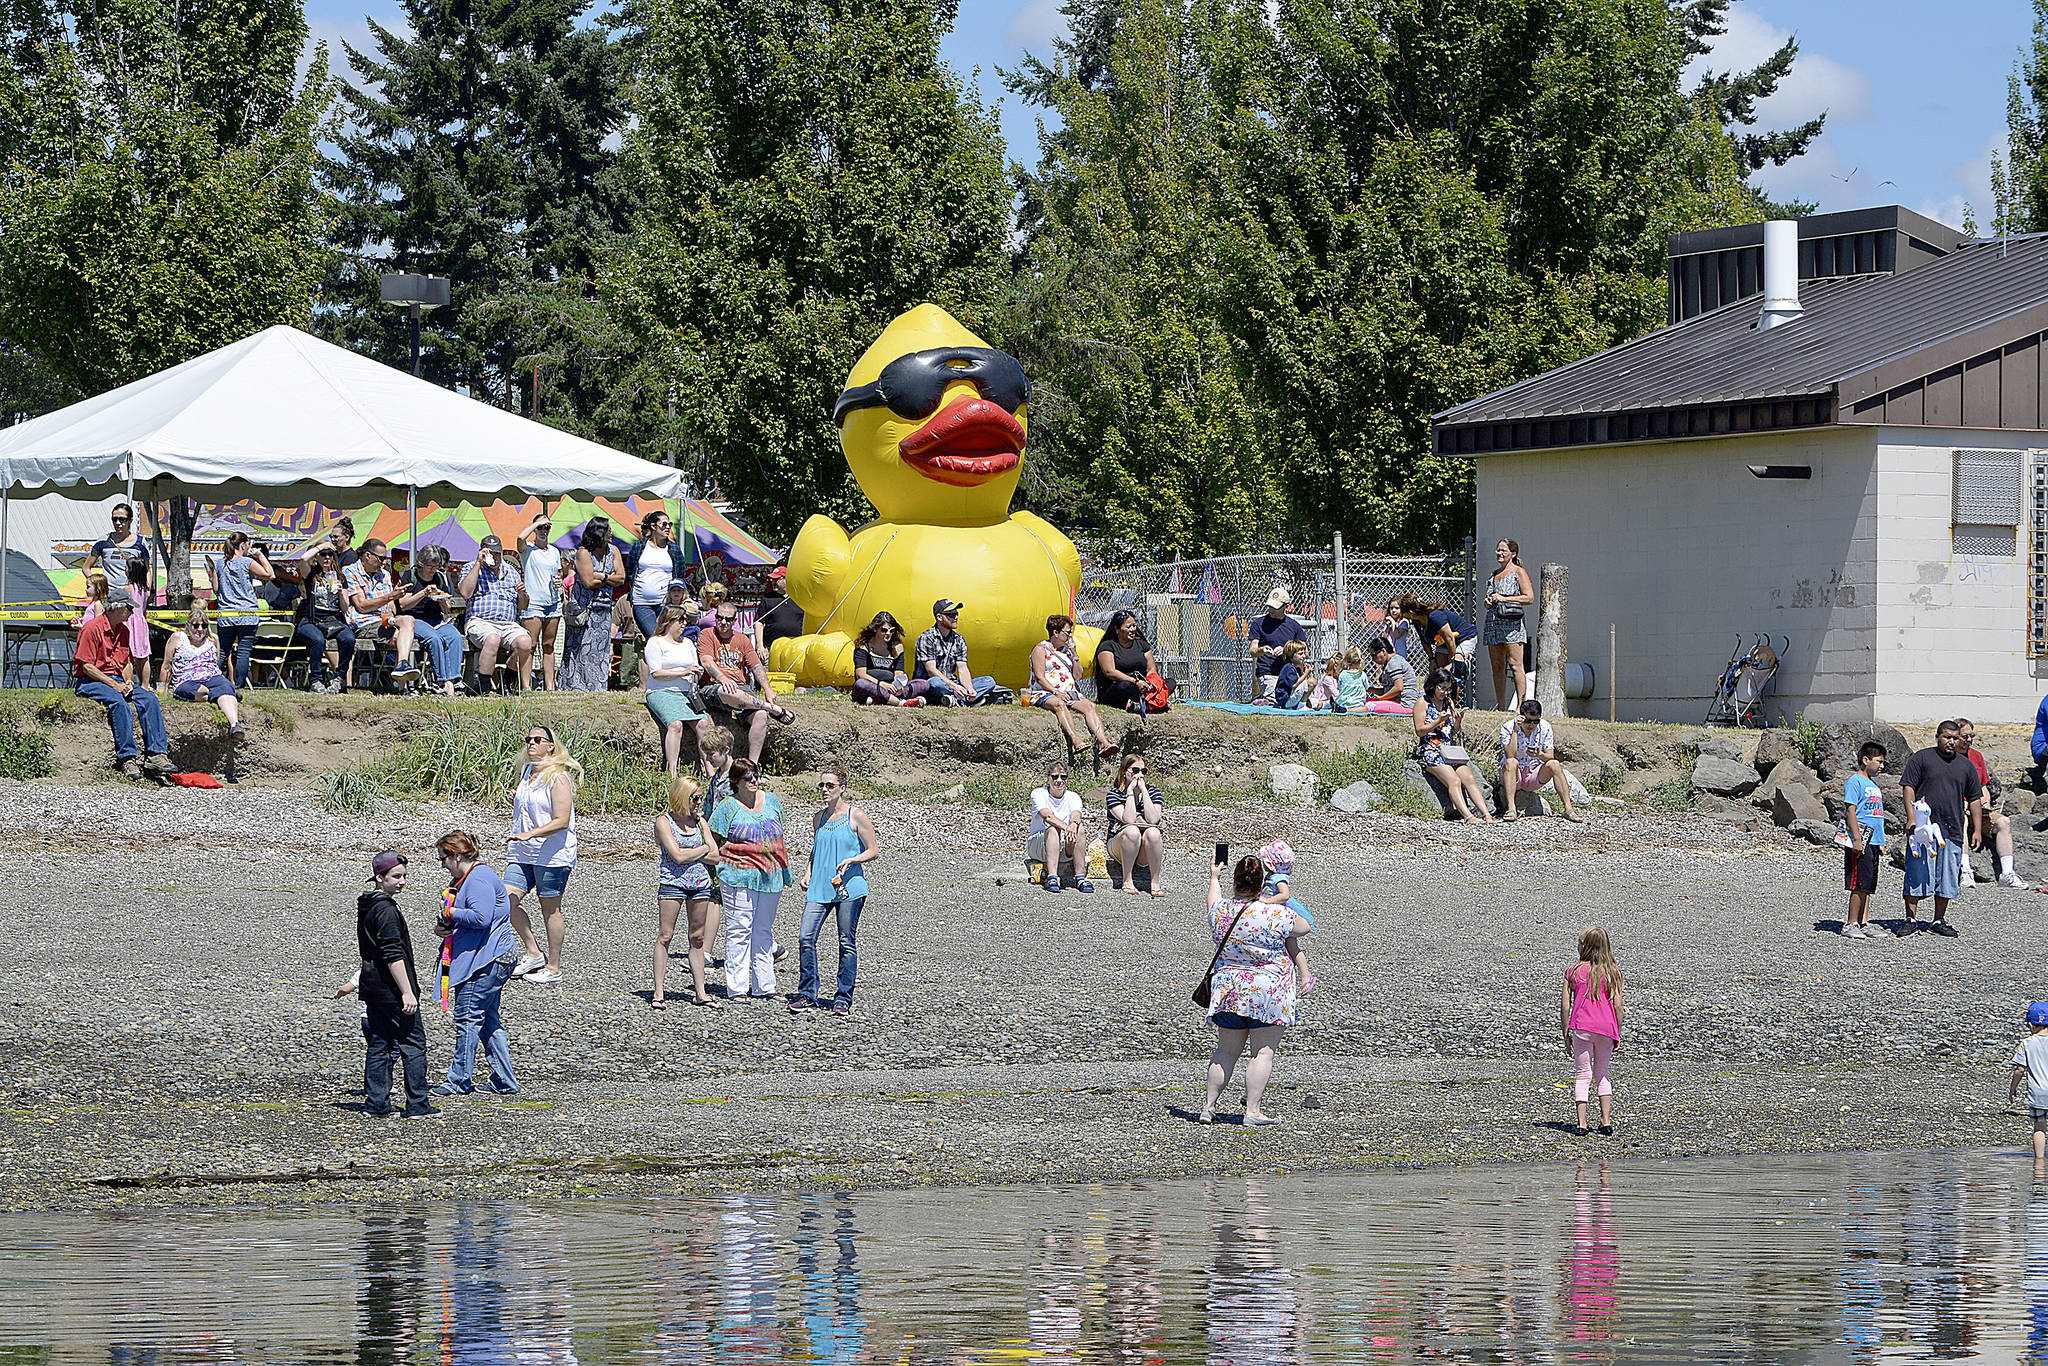 A crowd gathers on the beach at Silverdale Waterfront Park to watch the Rotary Club Duck Race. This type of gathering still may not be allowed for some time. (Mark Krulish/Kitsap News Group)